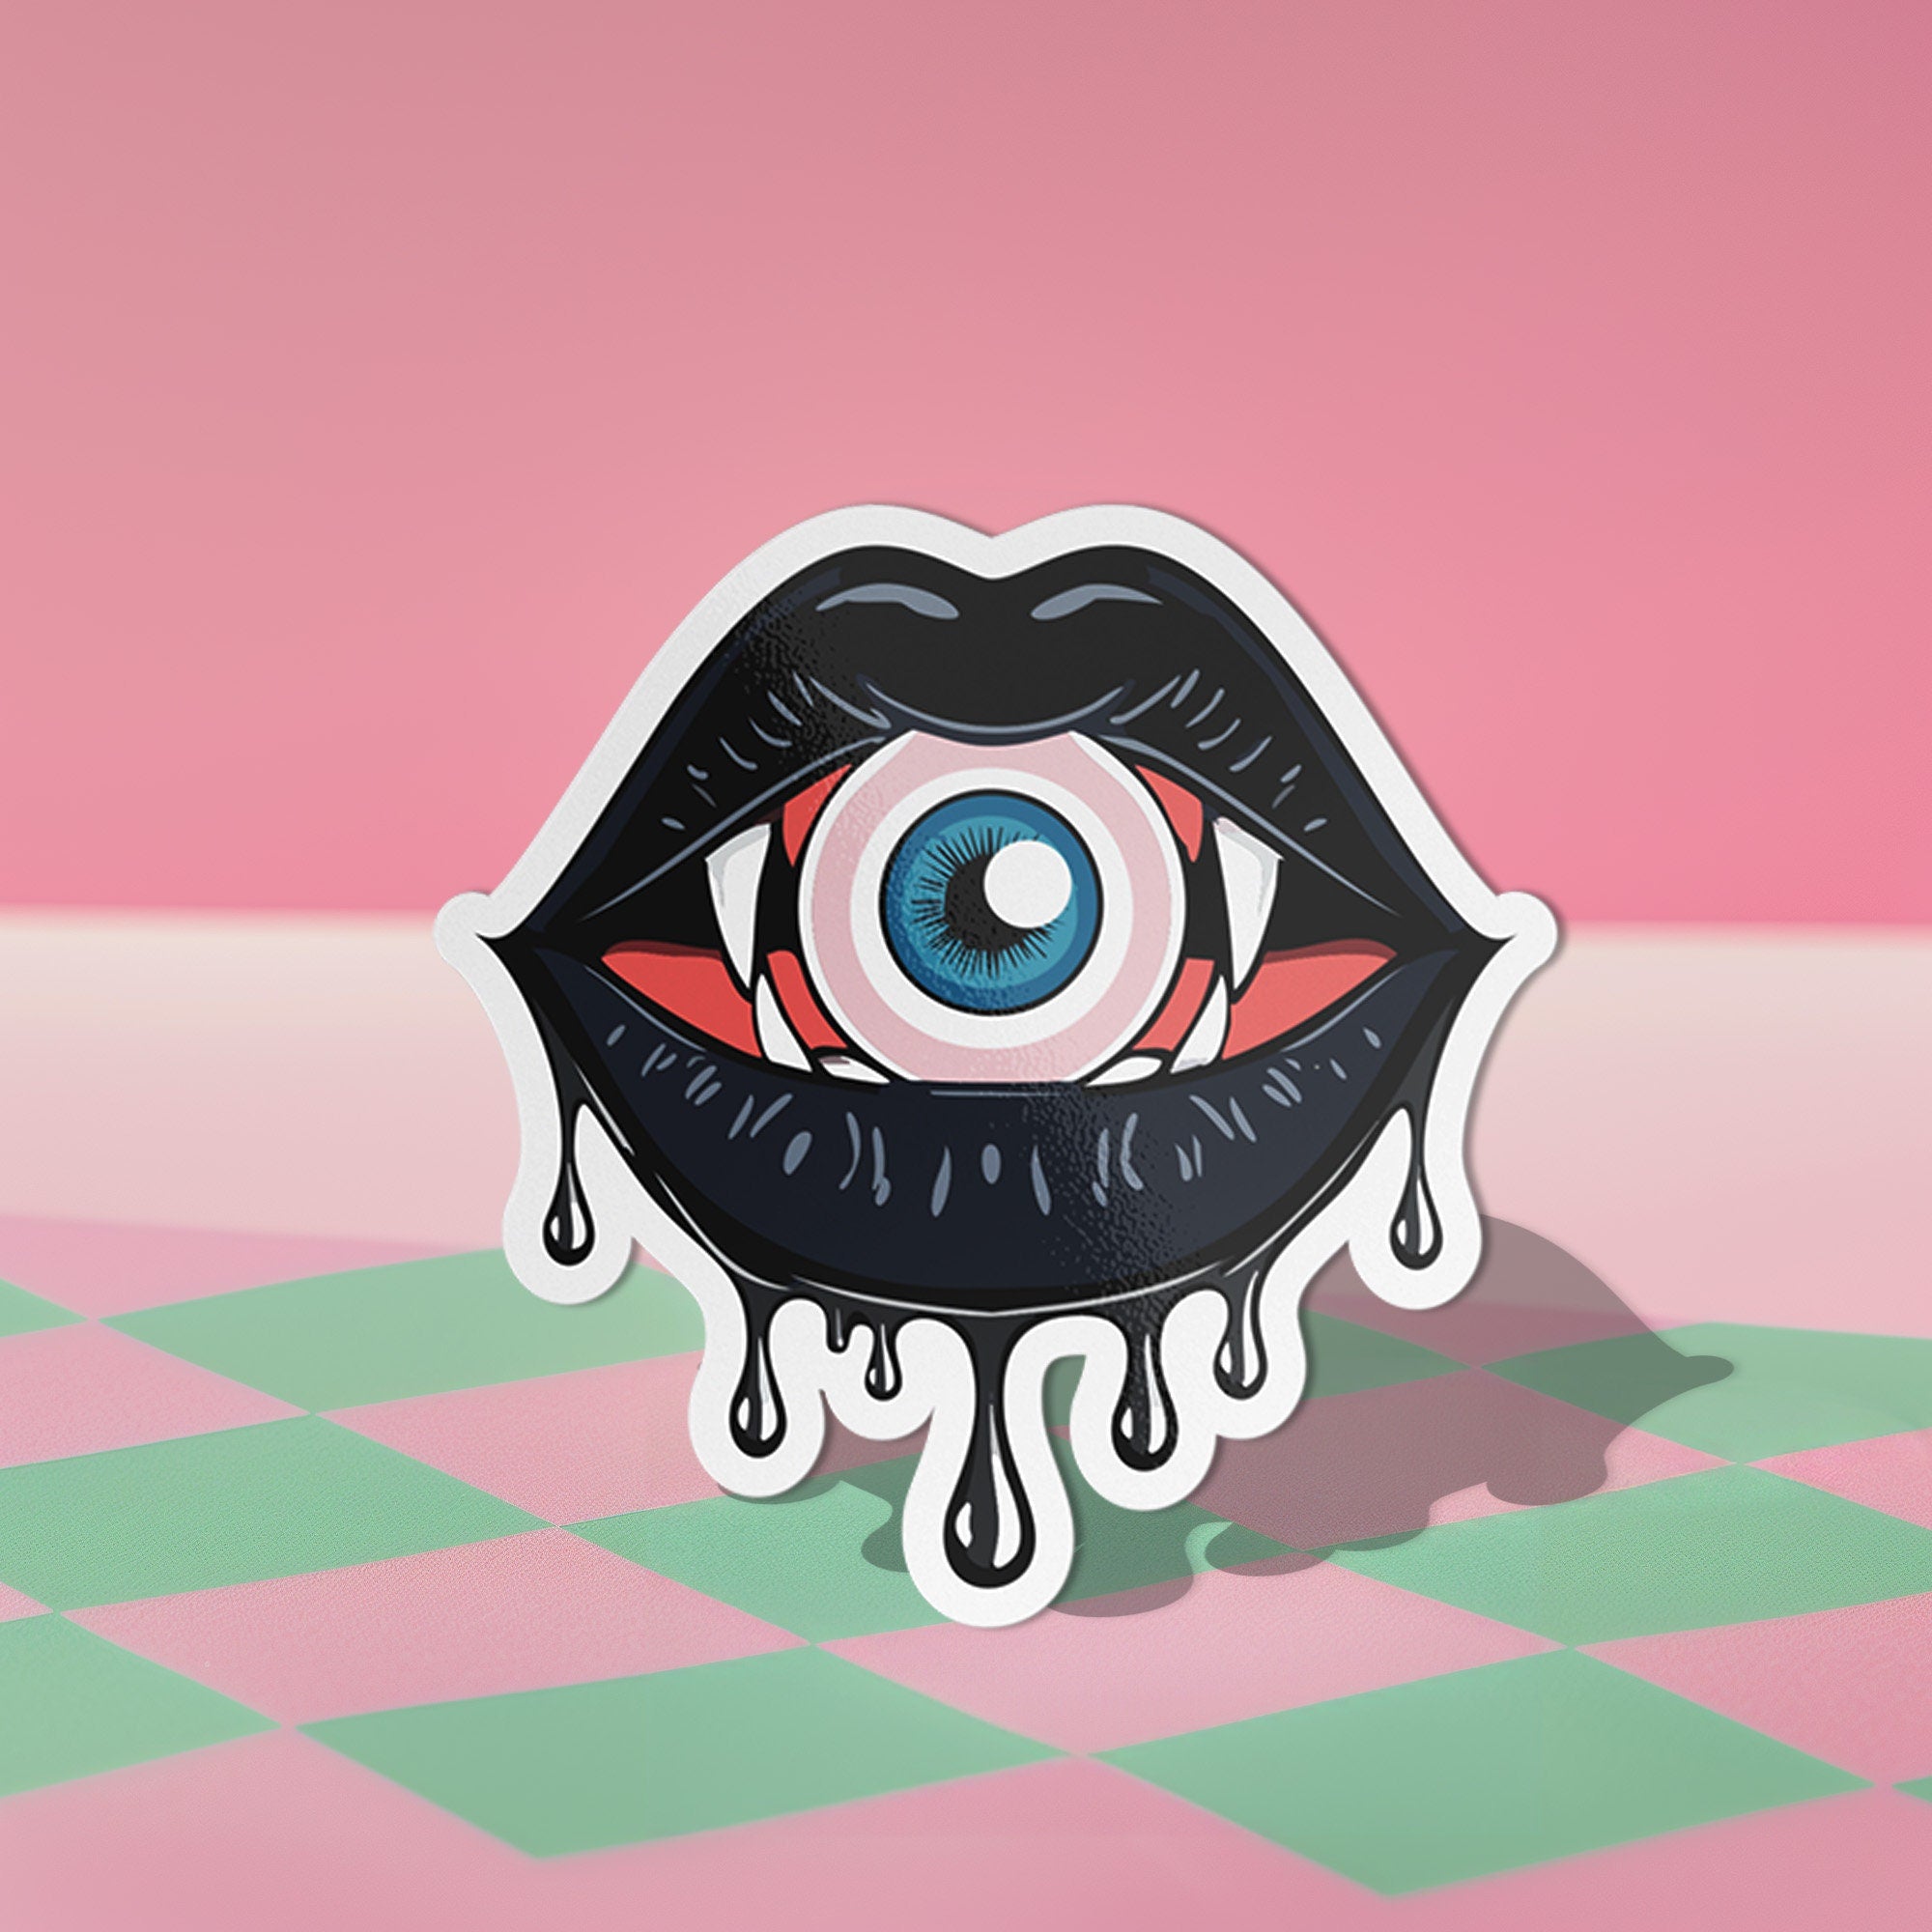 Eyeball vampire fangs sticker with black lips, perfect for adding a spooky touch to laptops, phones, and water bottles. Available in Prism, Gem, and Glitter finishes. Handmade in Austin, Texas.